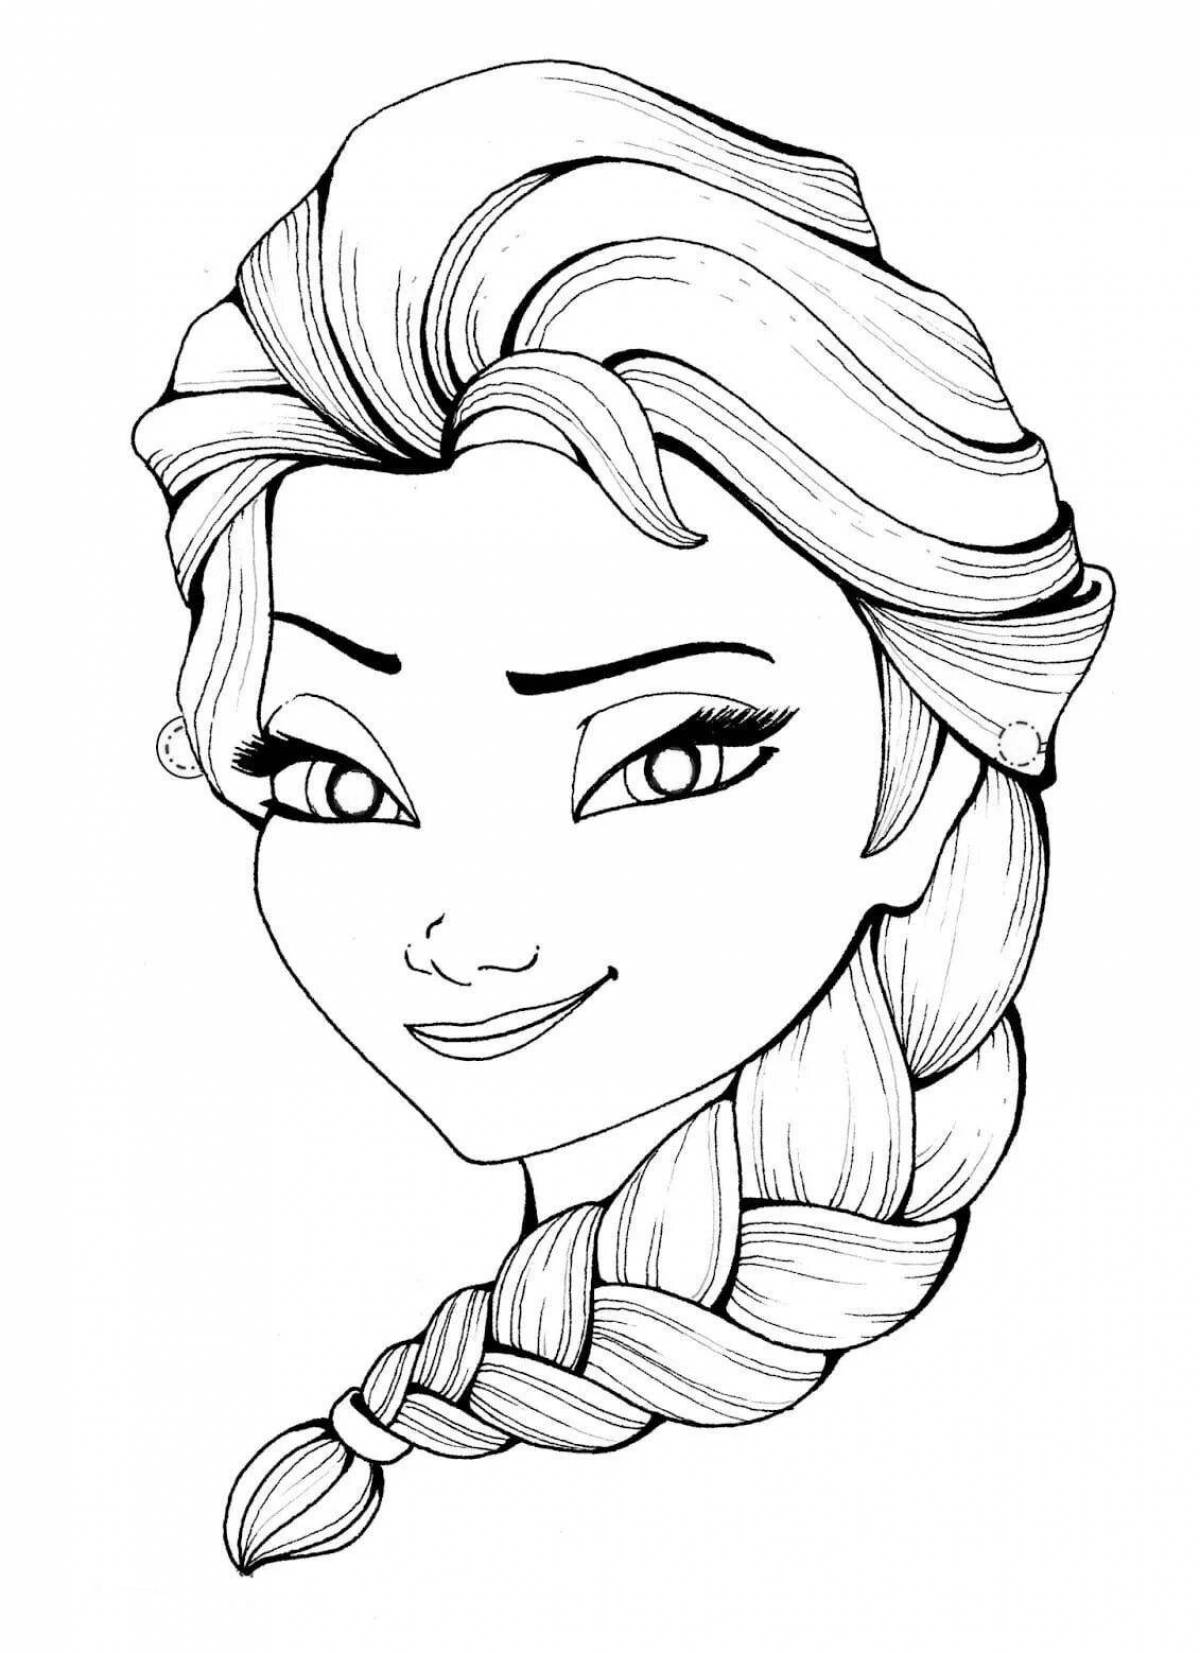 Exalted elsa face coloring